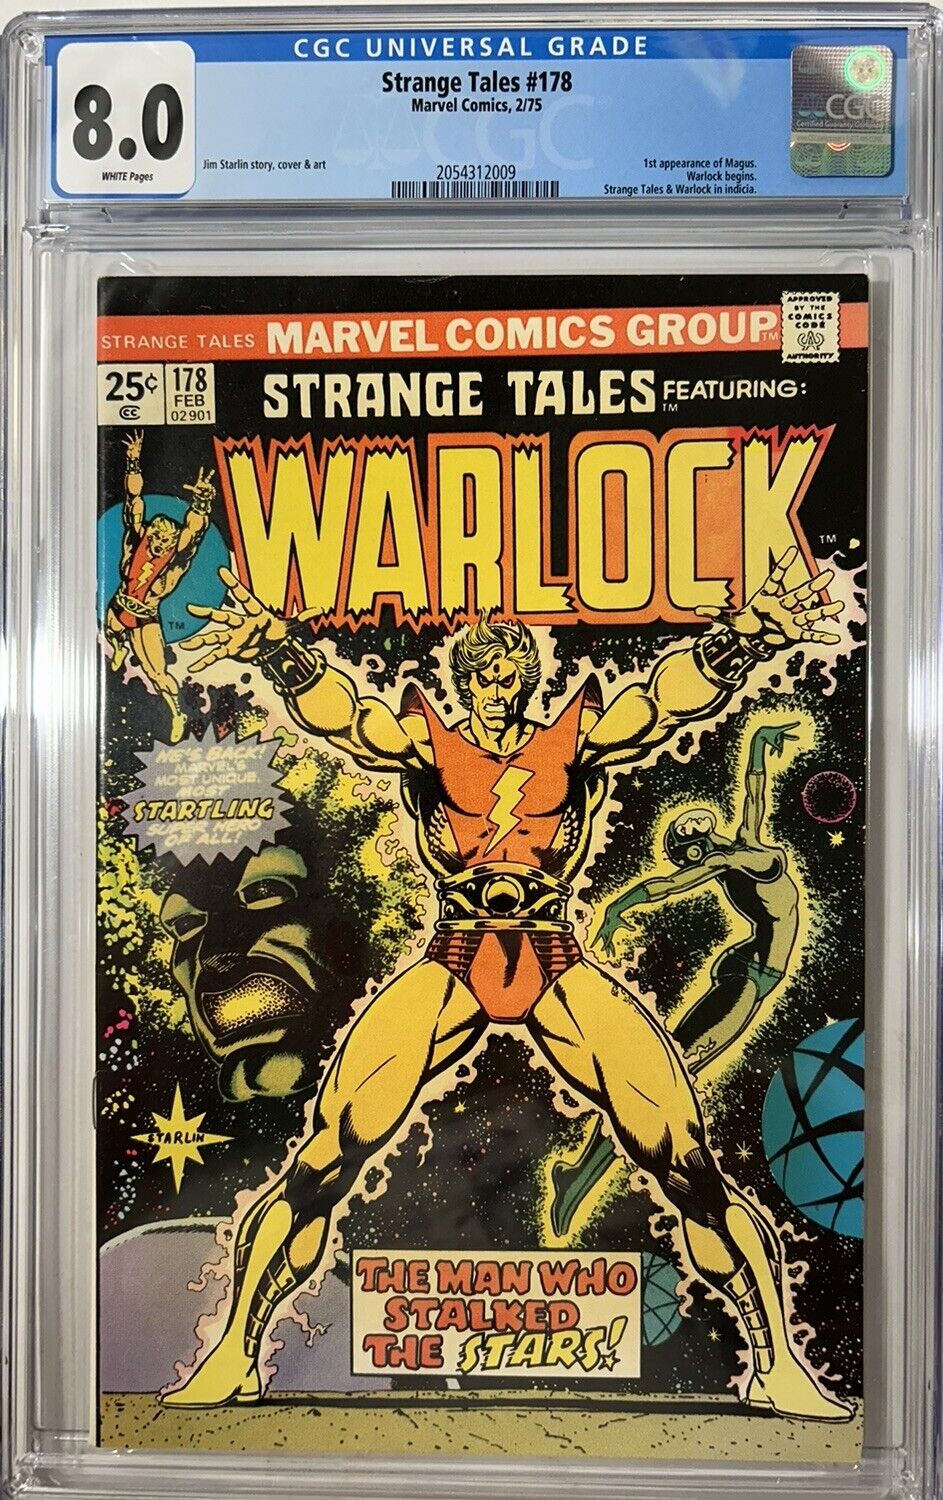 Strange Tales #178 CGC 8.0 White Pages (1975) – 1st app Magus - Warlock begins